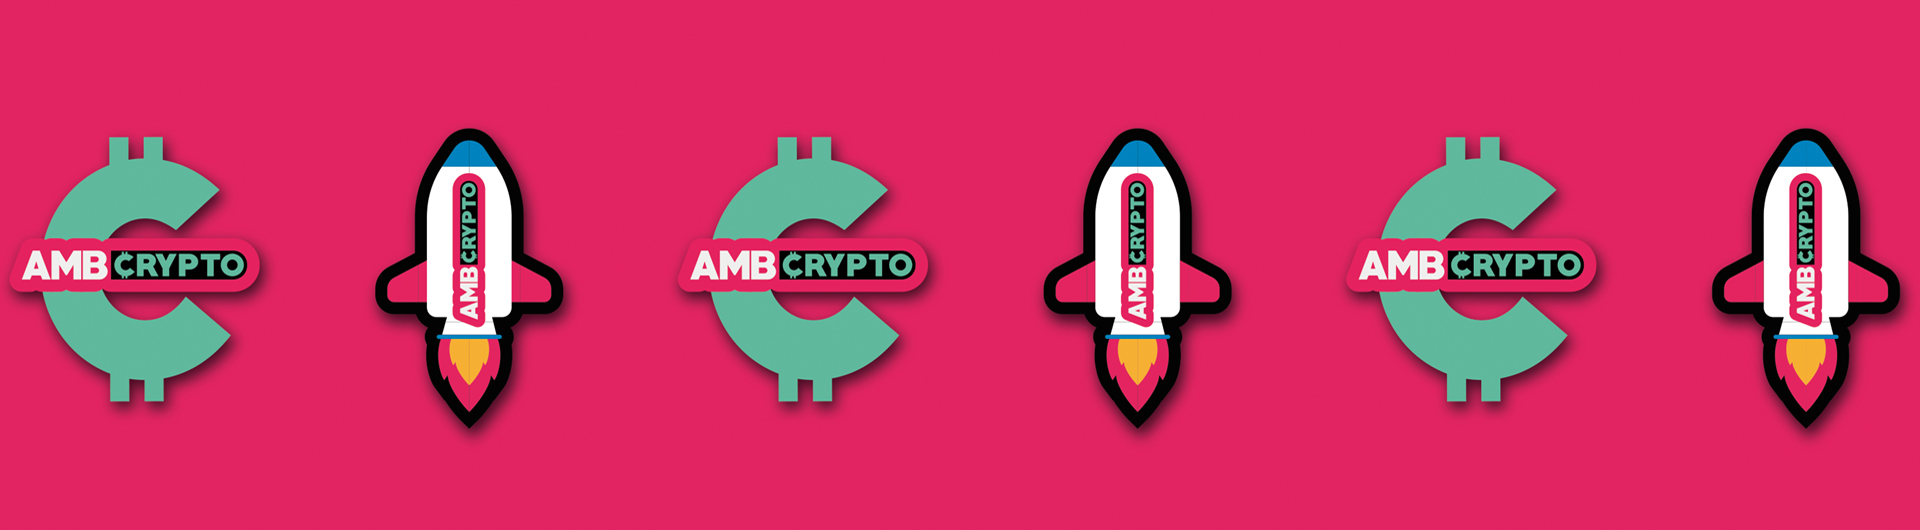 Amb Crypto, partnered with | Trading Show Europe